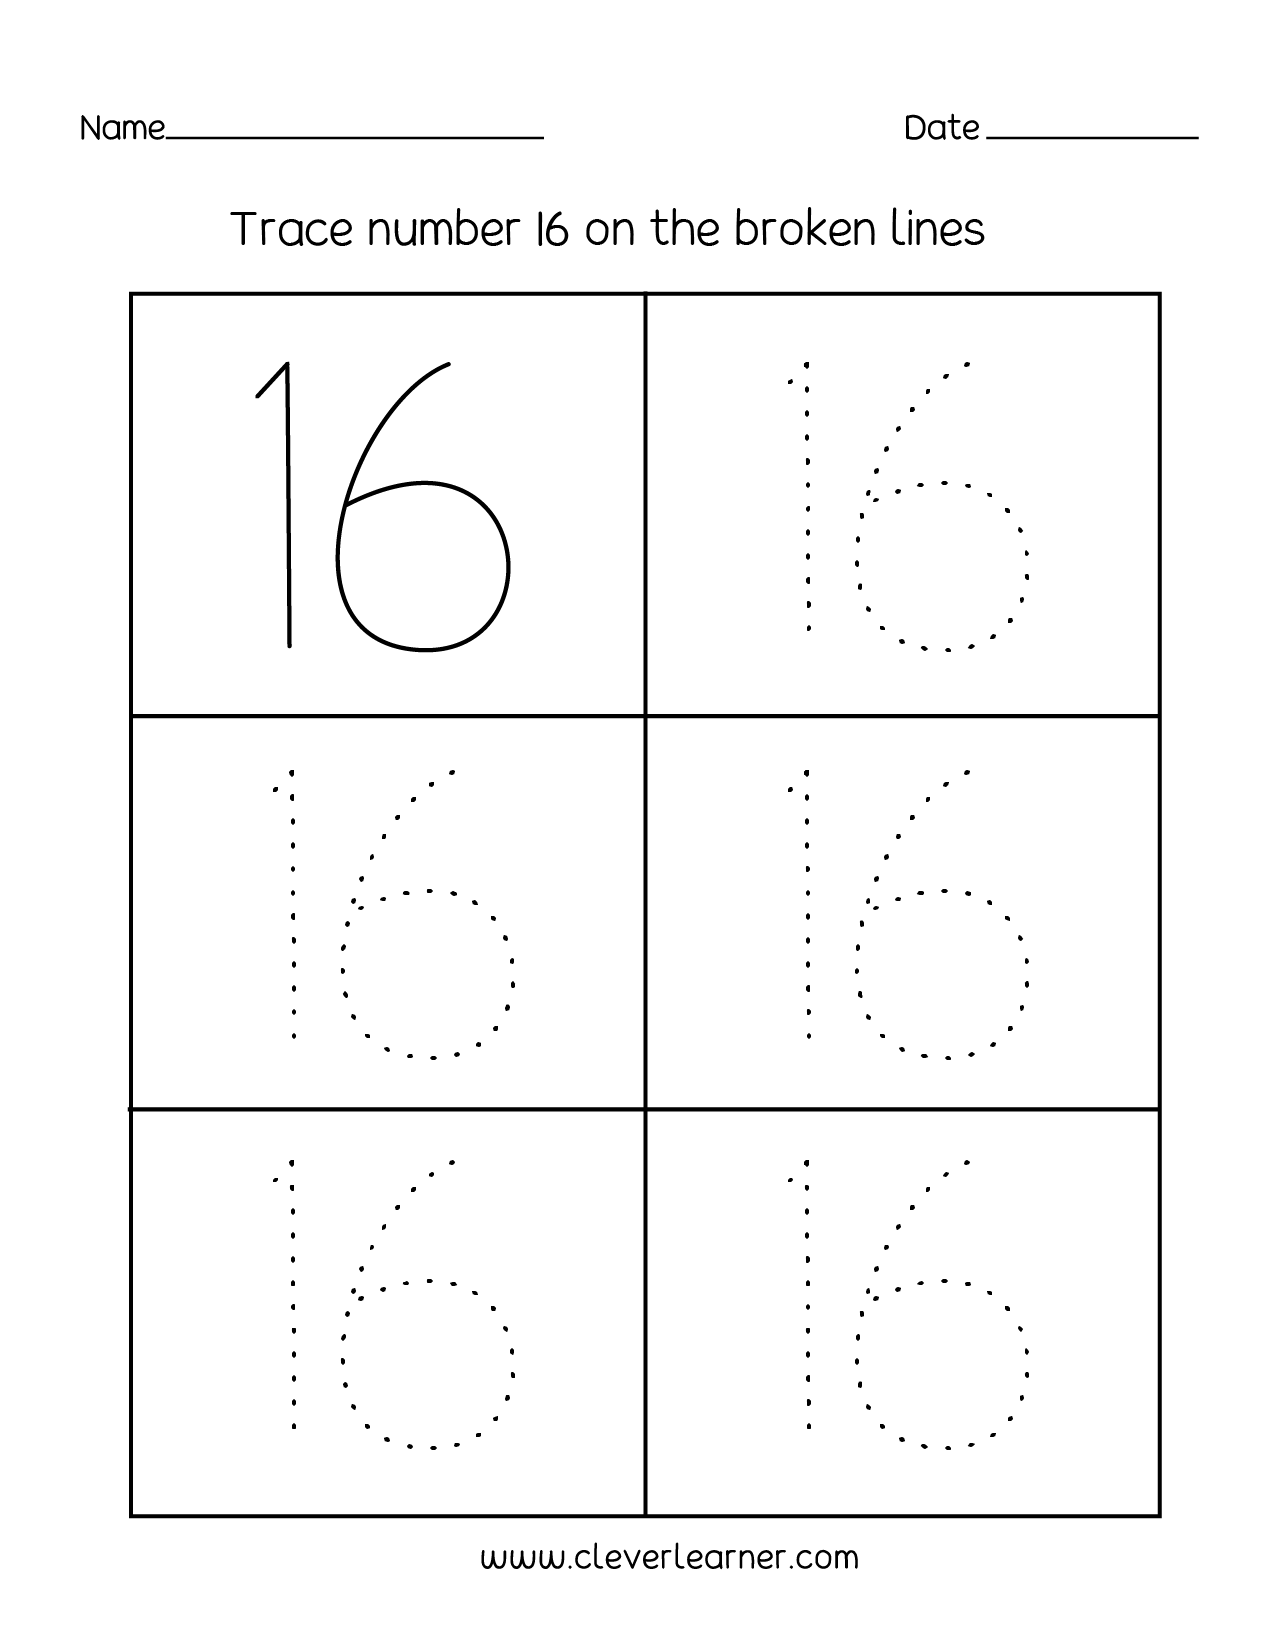 number-16-writing-counting-and-identification-printable-worksheets-for-children